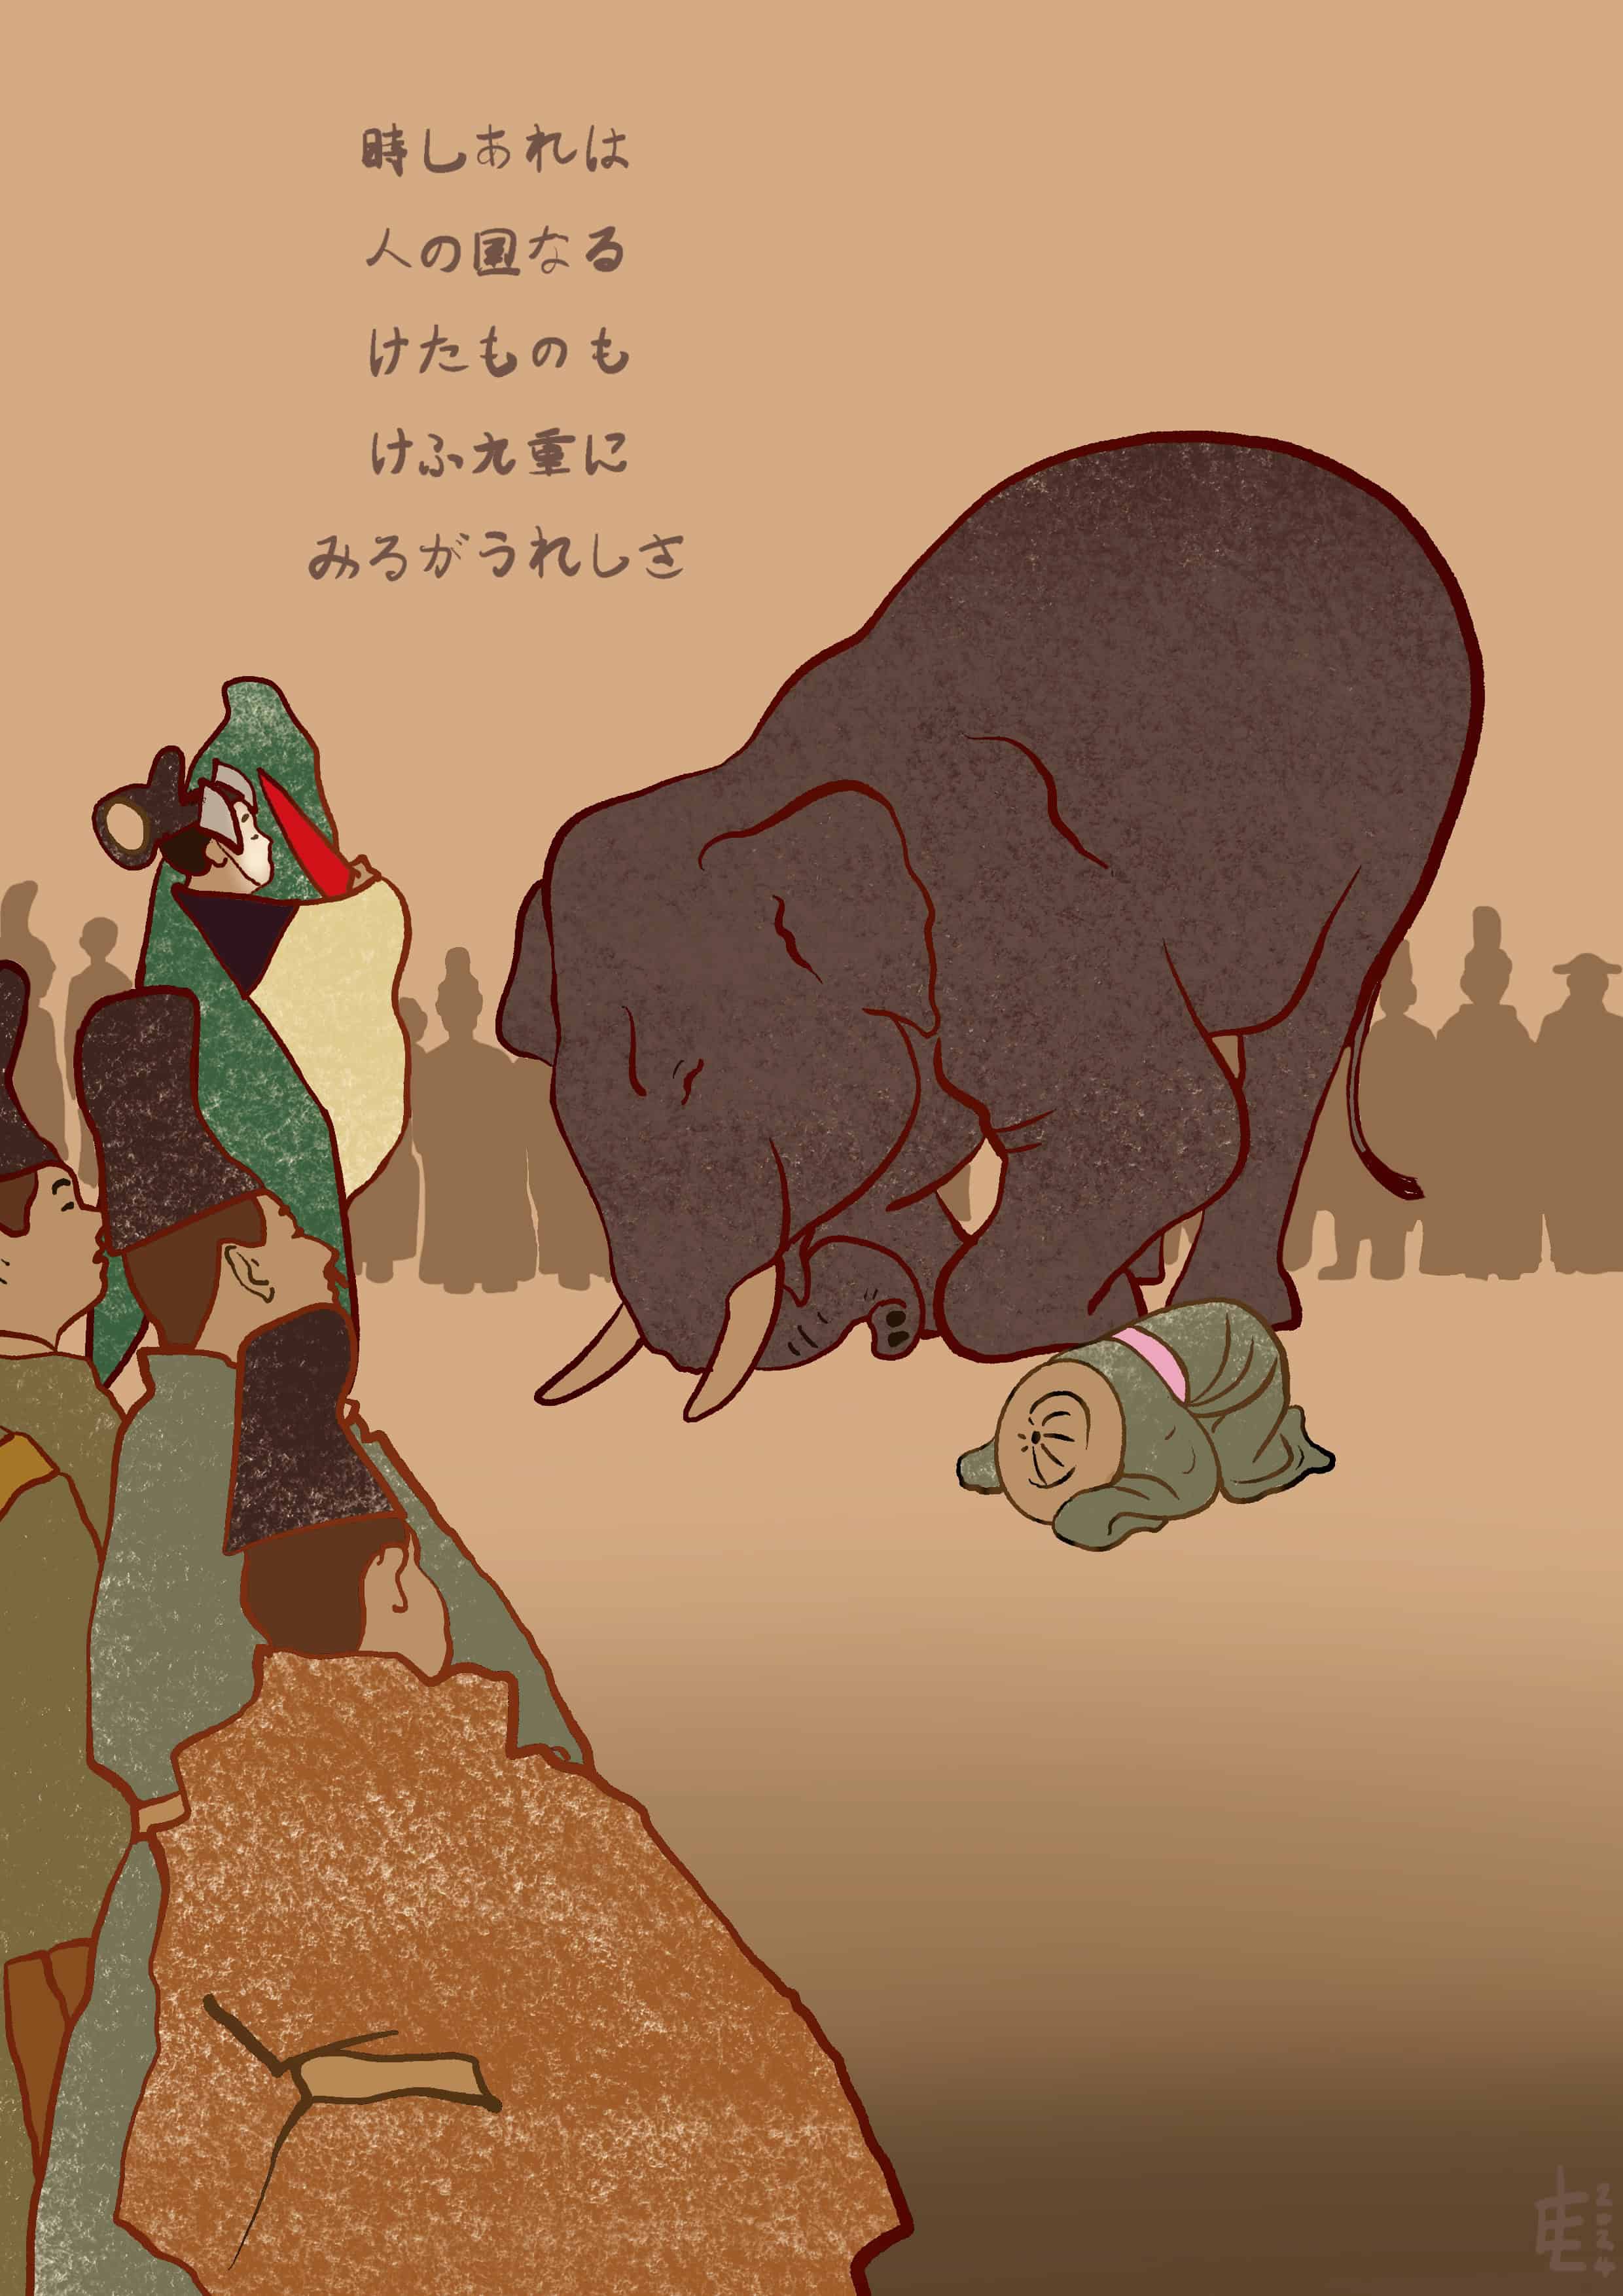 Elephant and his mahout bowing before the Japanese emperor.